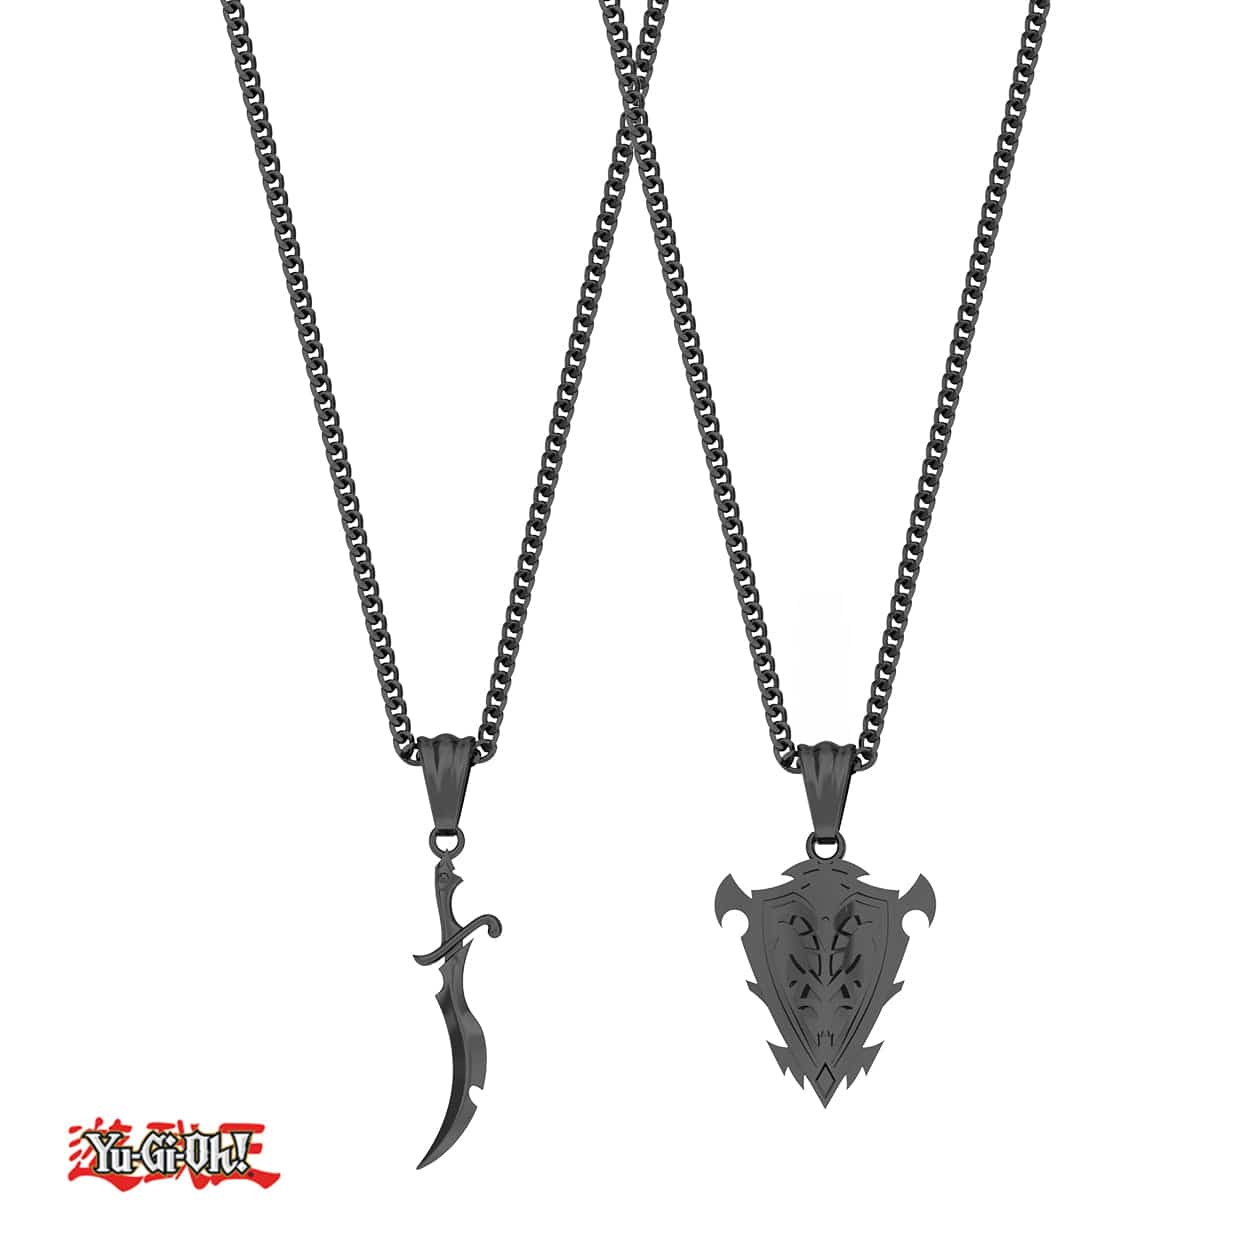 Yu-Gi-Oh!™ Black Luster Soldier Necklace